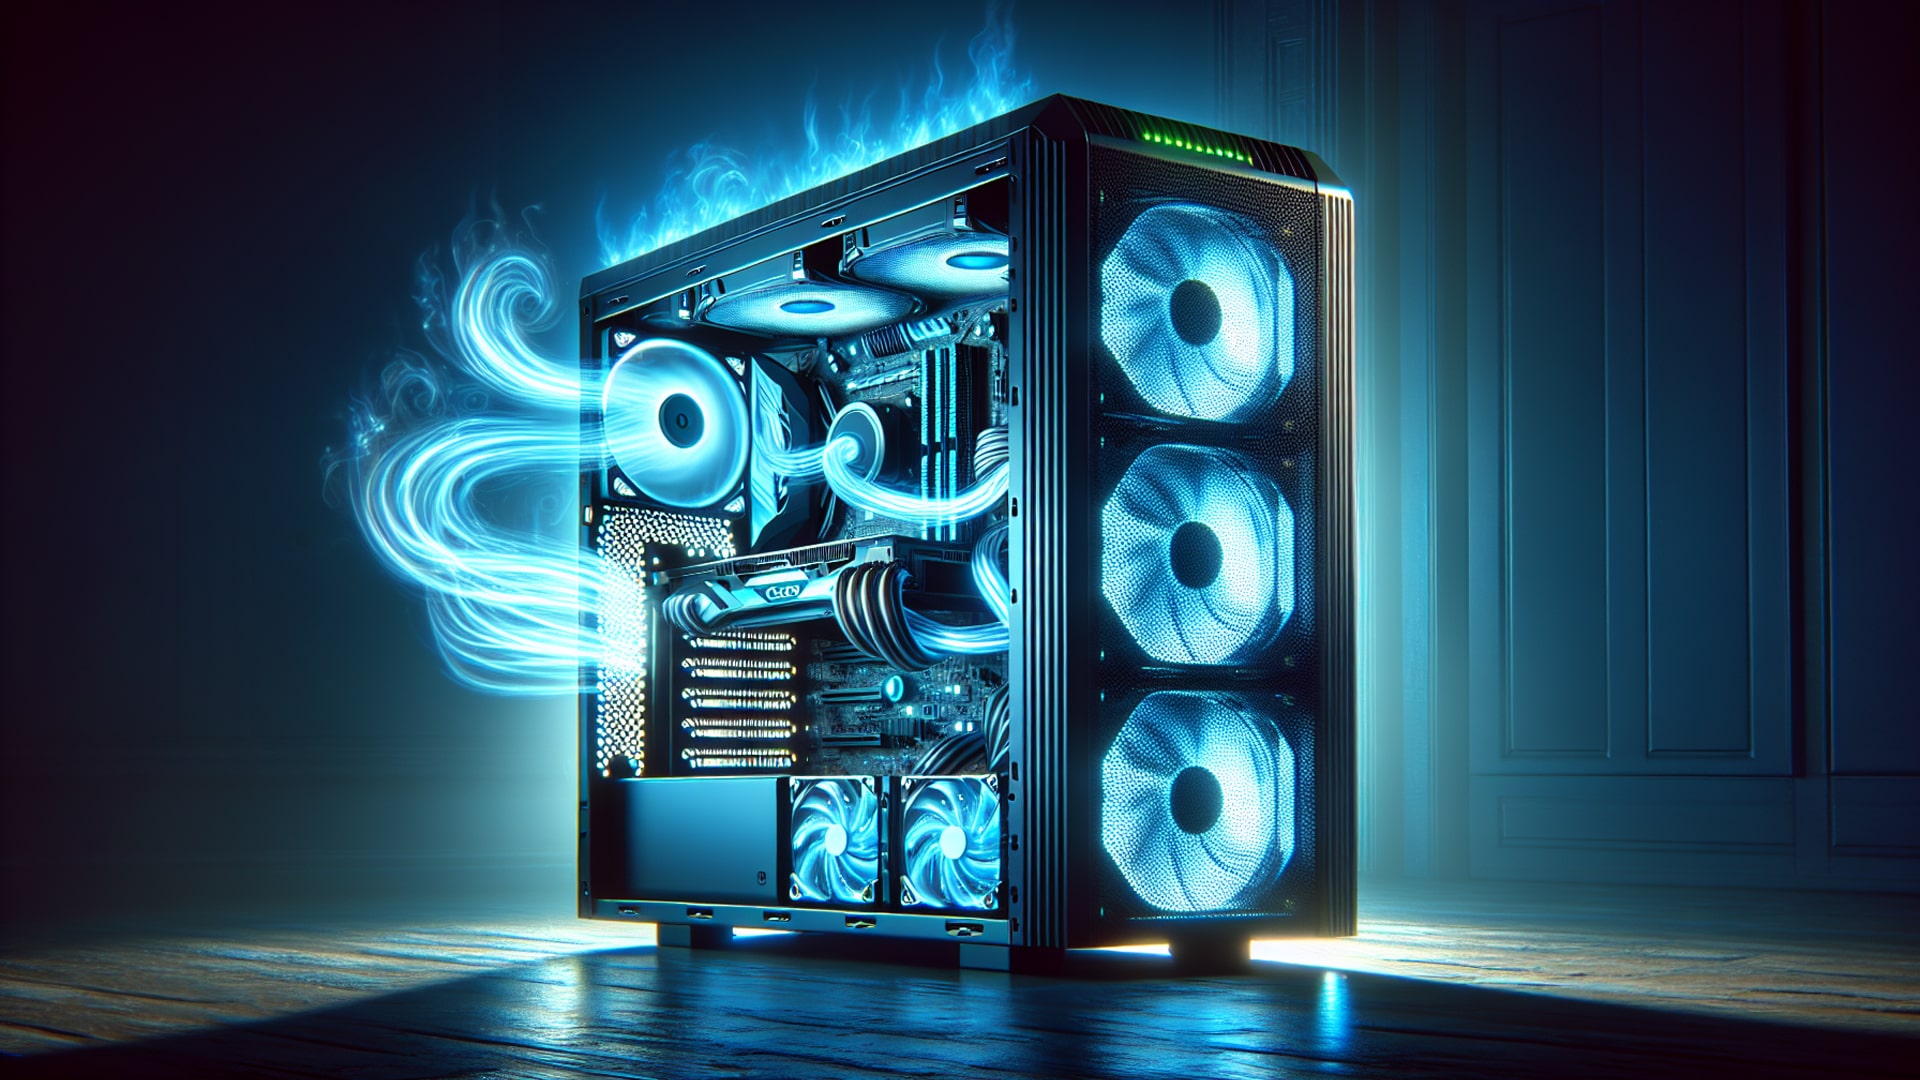 High-end gaming PC setup with efficient power supply and advanced water cooling system